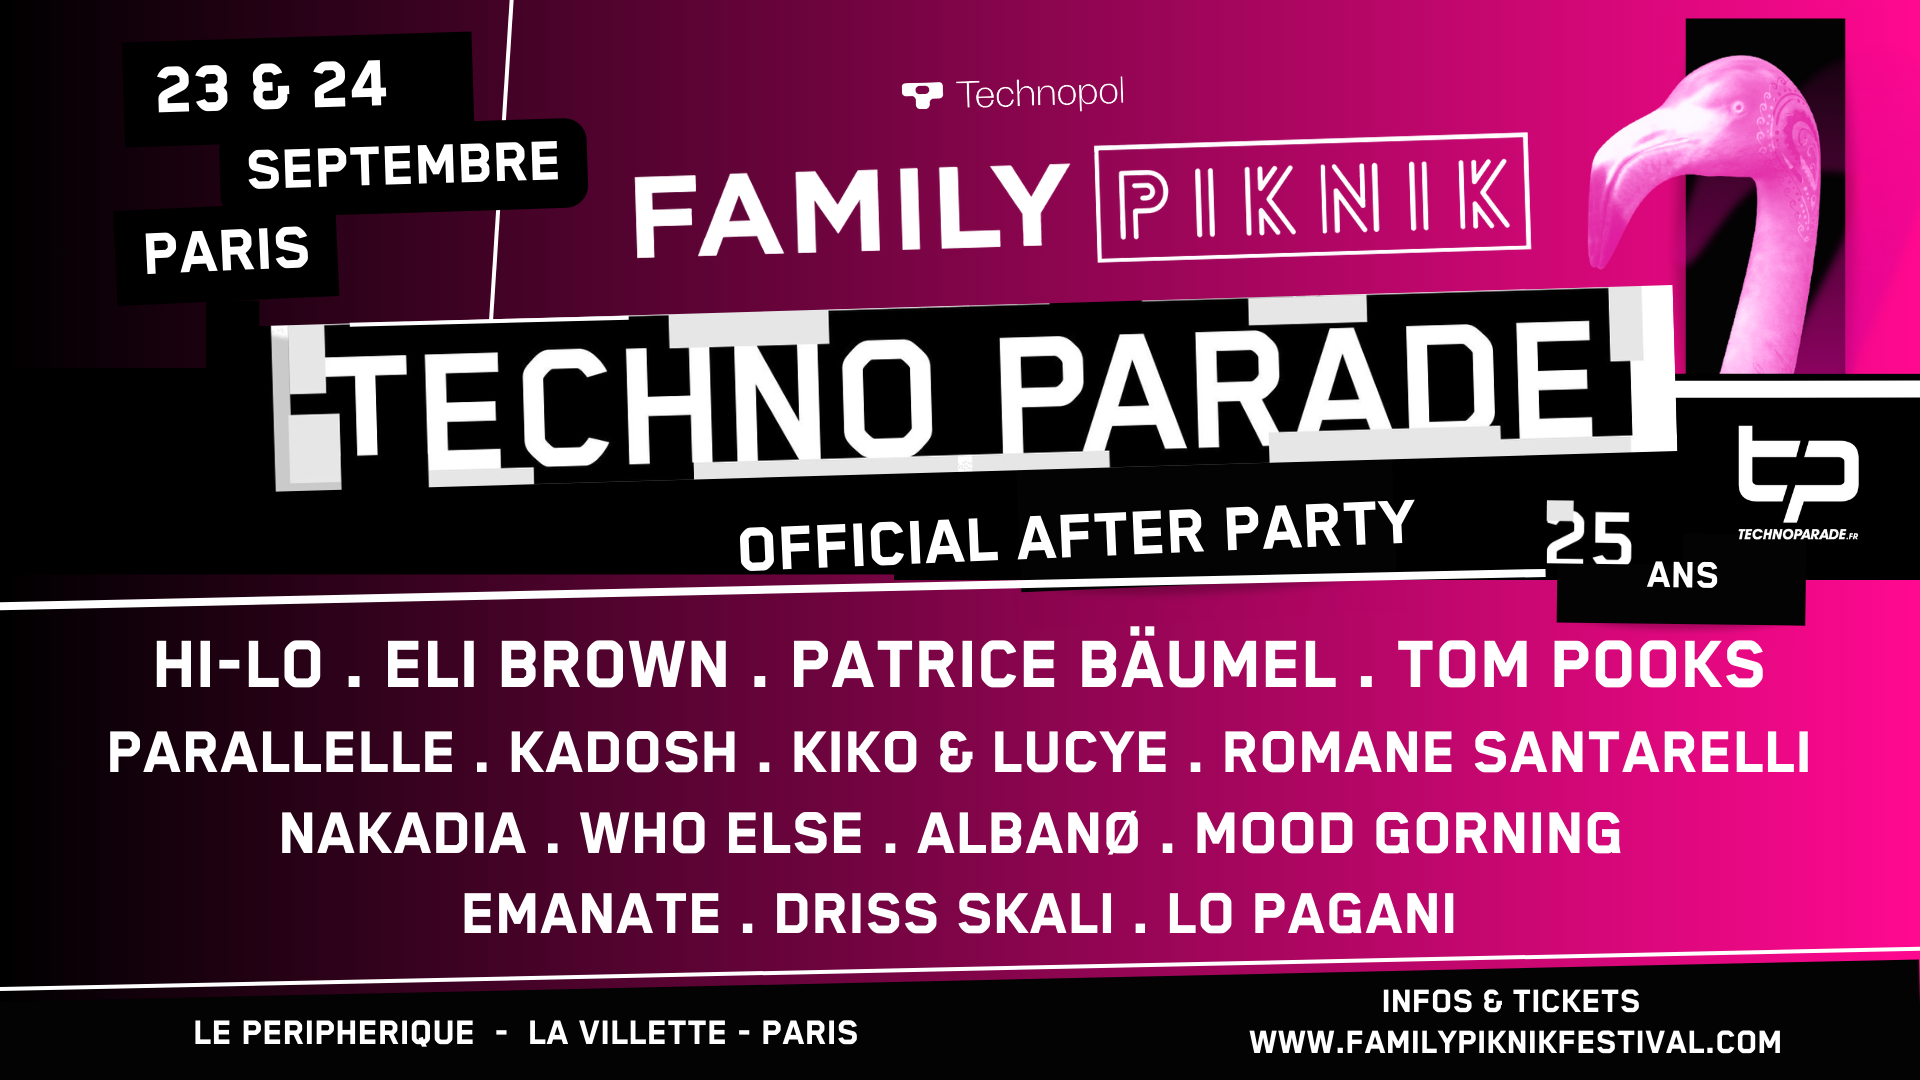 Family Piknik x Techno Parade 25 ans - AFTERS OFFICIELS - フライヤー表